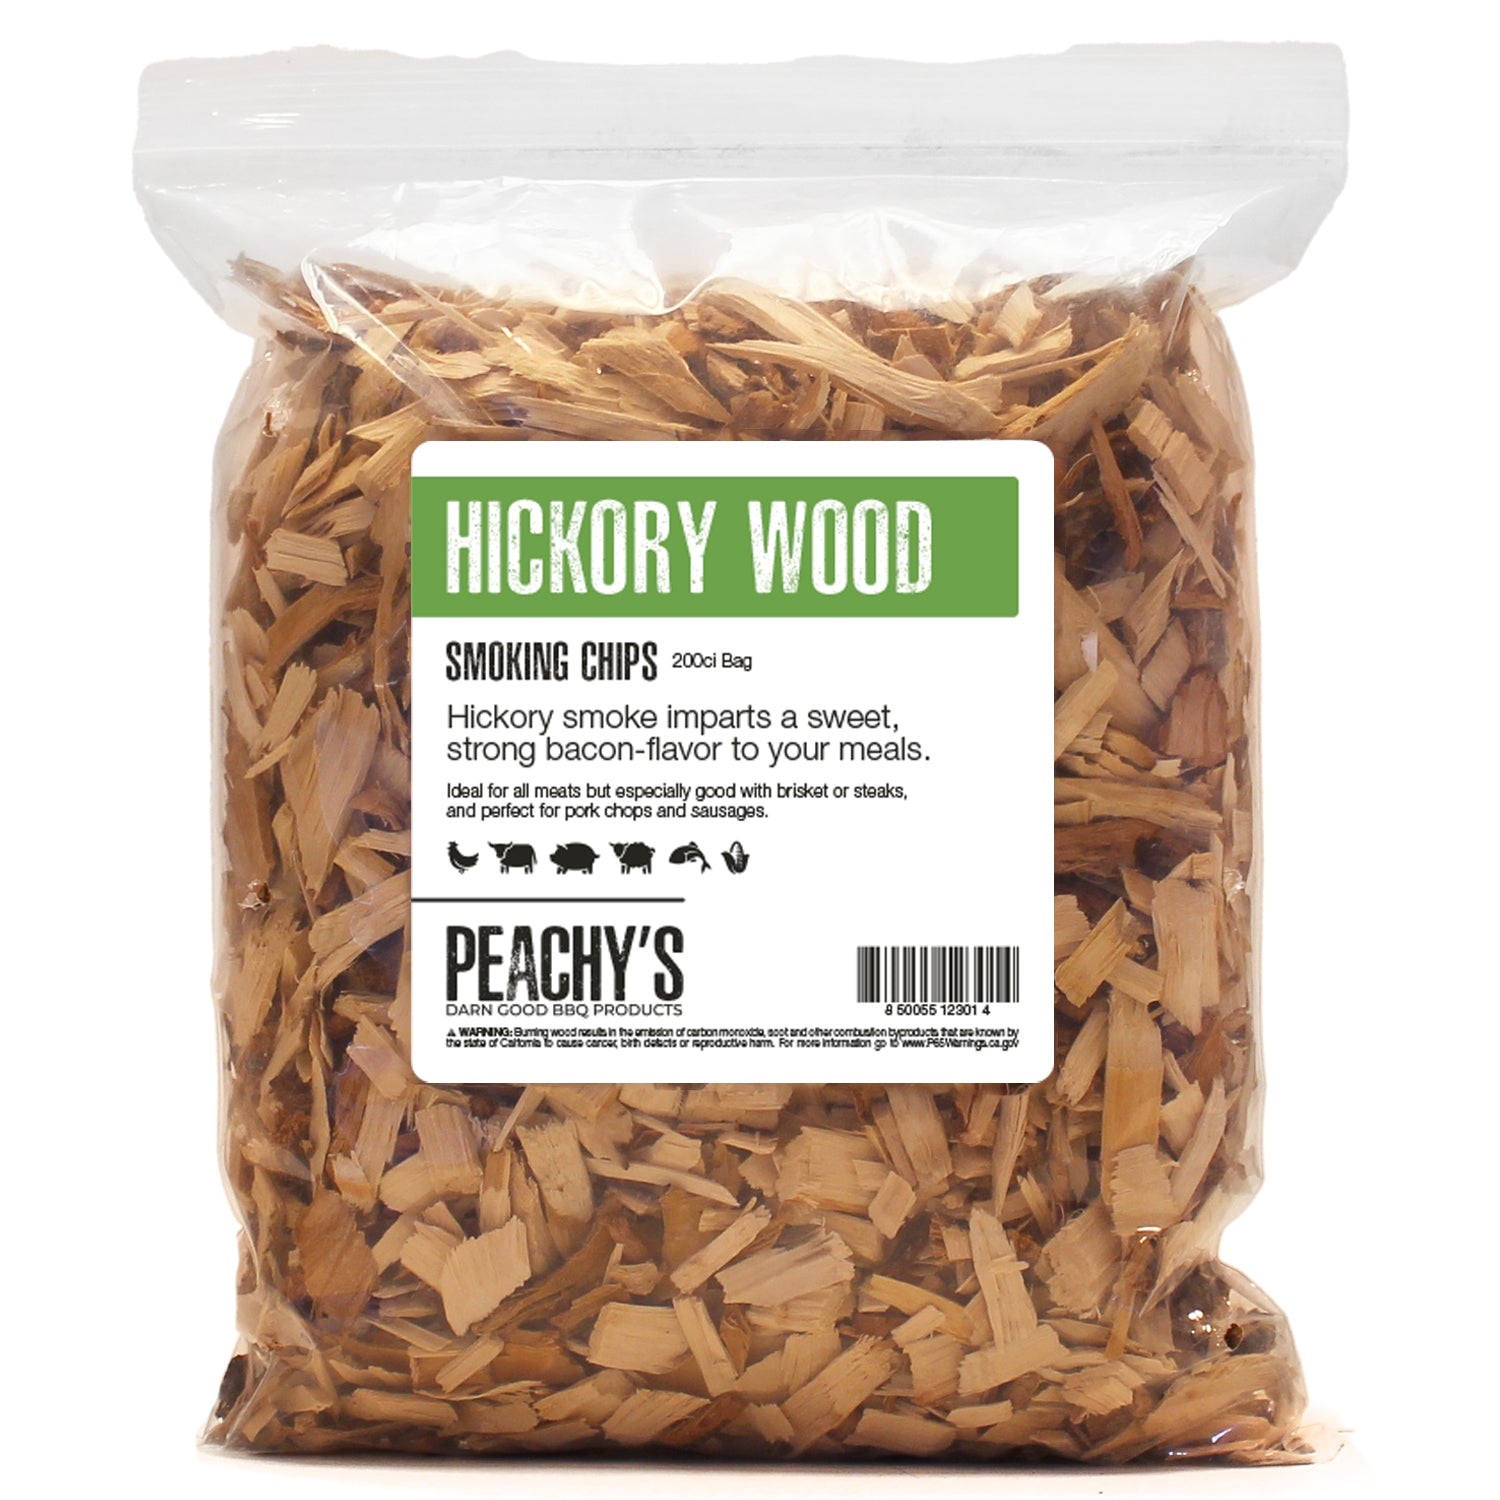 HICKORY Chips | 200ci Bag of Premium Smoking Woods by PEACHY'S